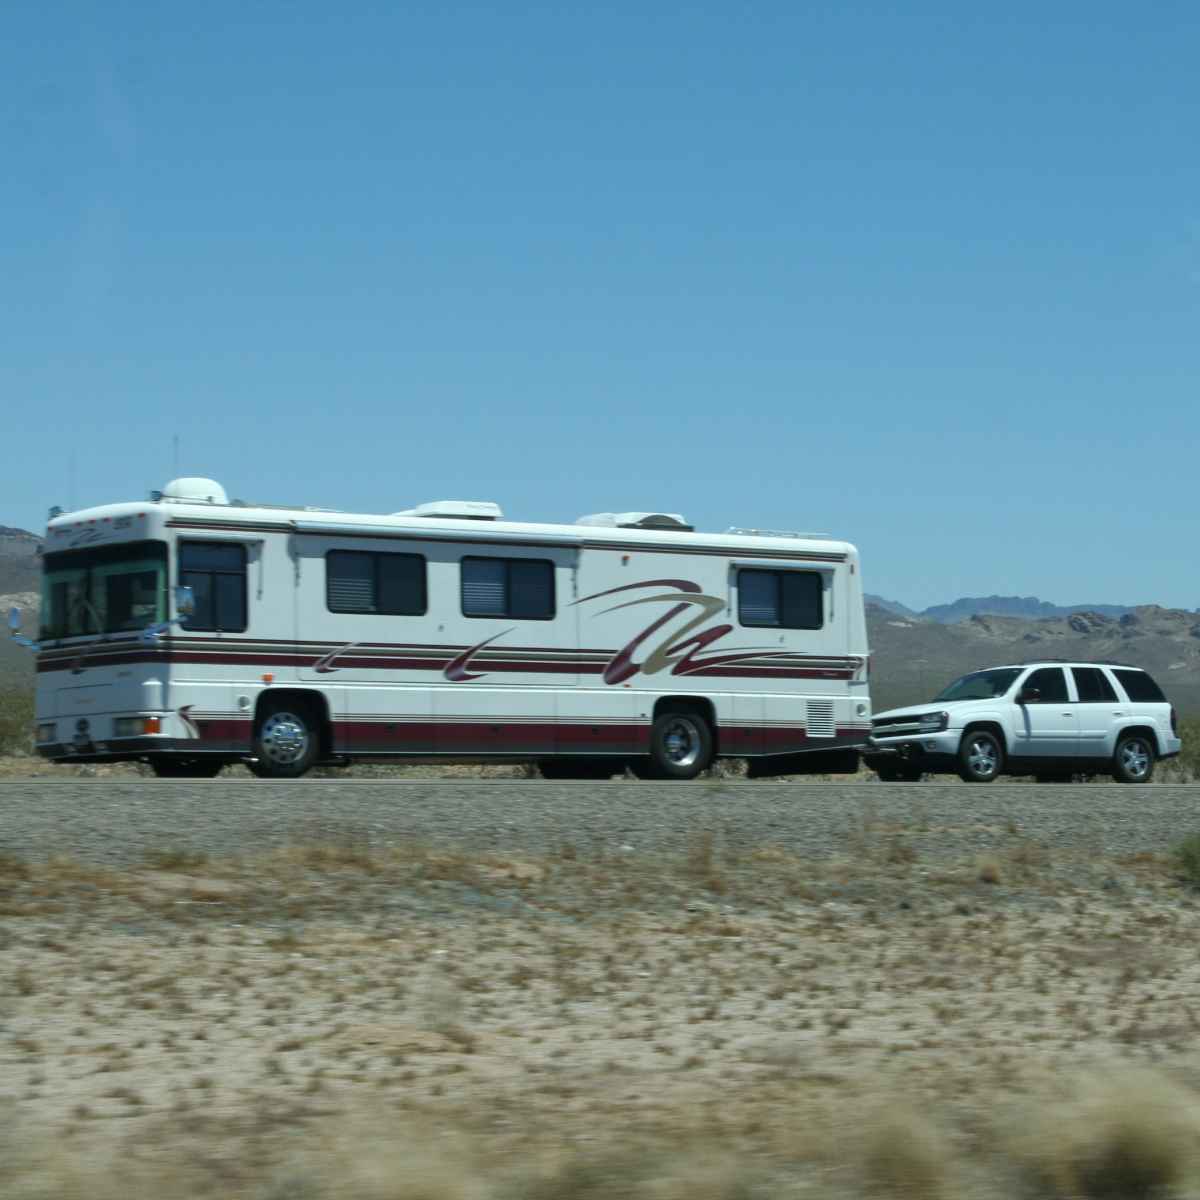 How to Tow a Car With an RV